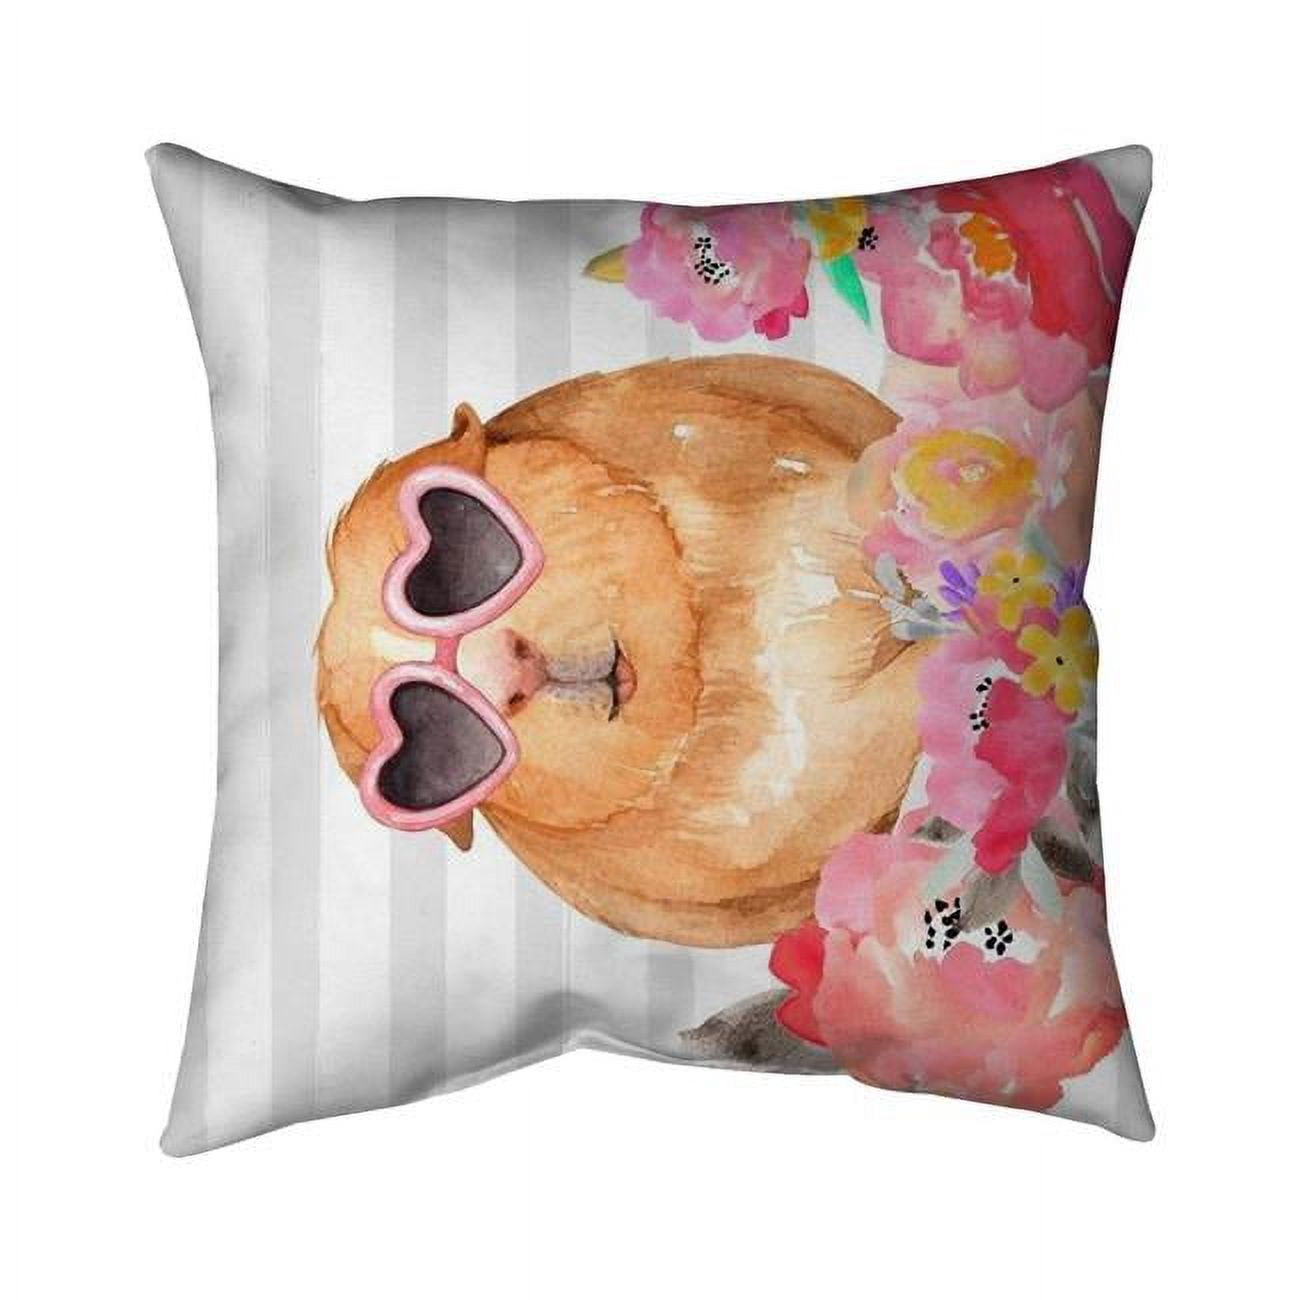 Fondo 18 x 18 in. Guinea Pig with Glasses-Double Sided Print Outdoor Pillow Cover